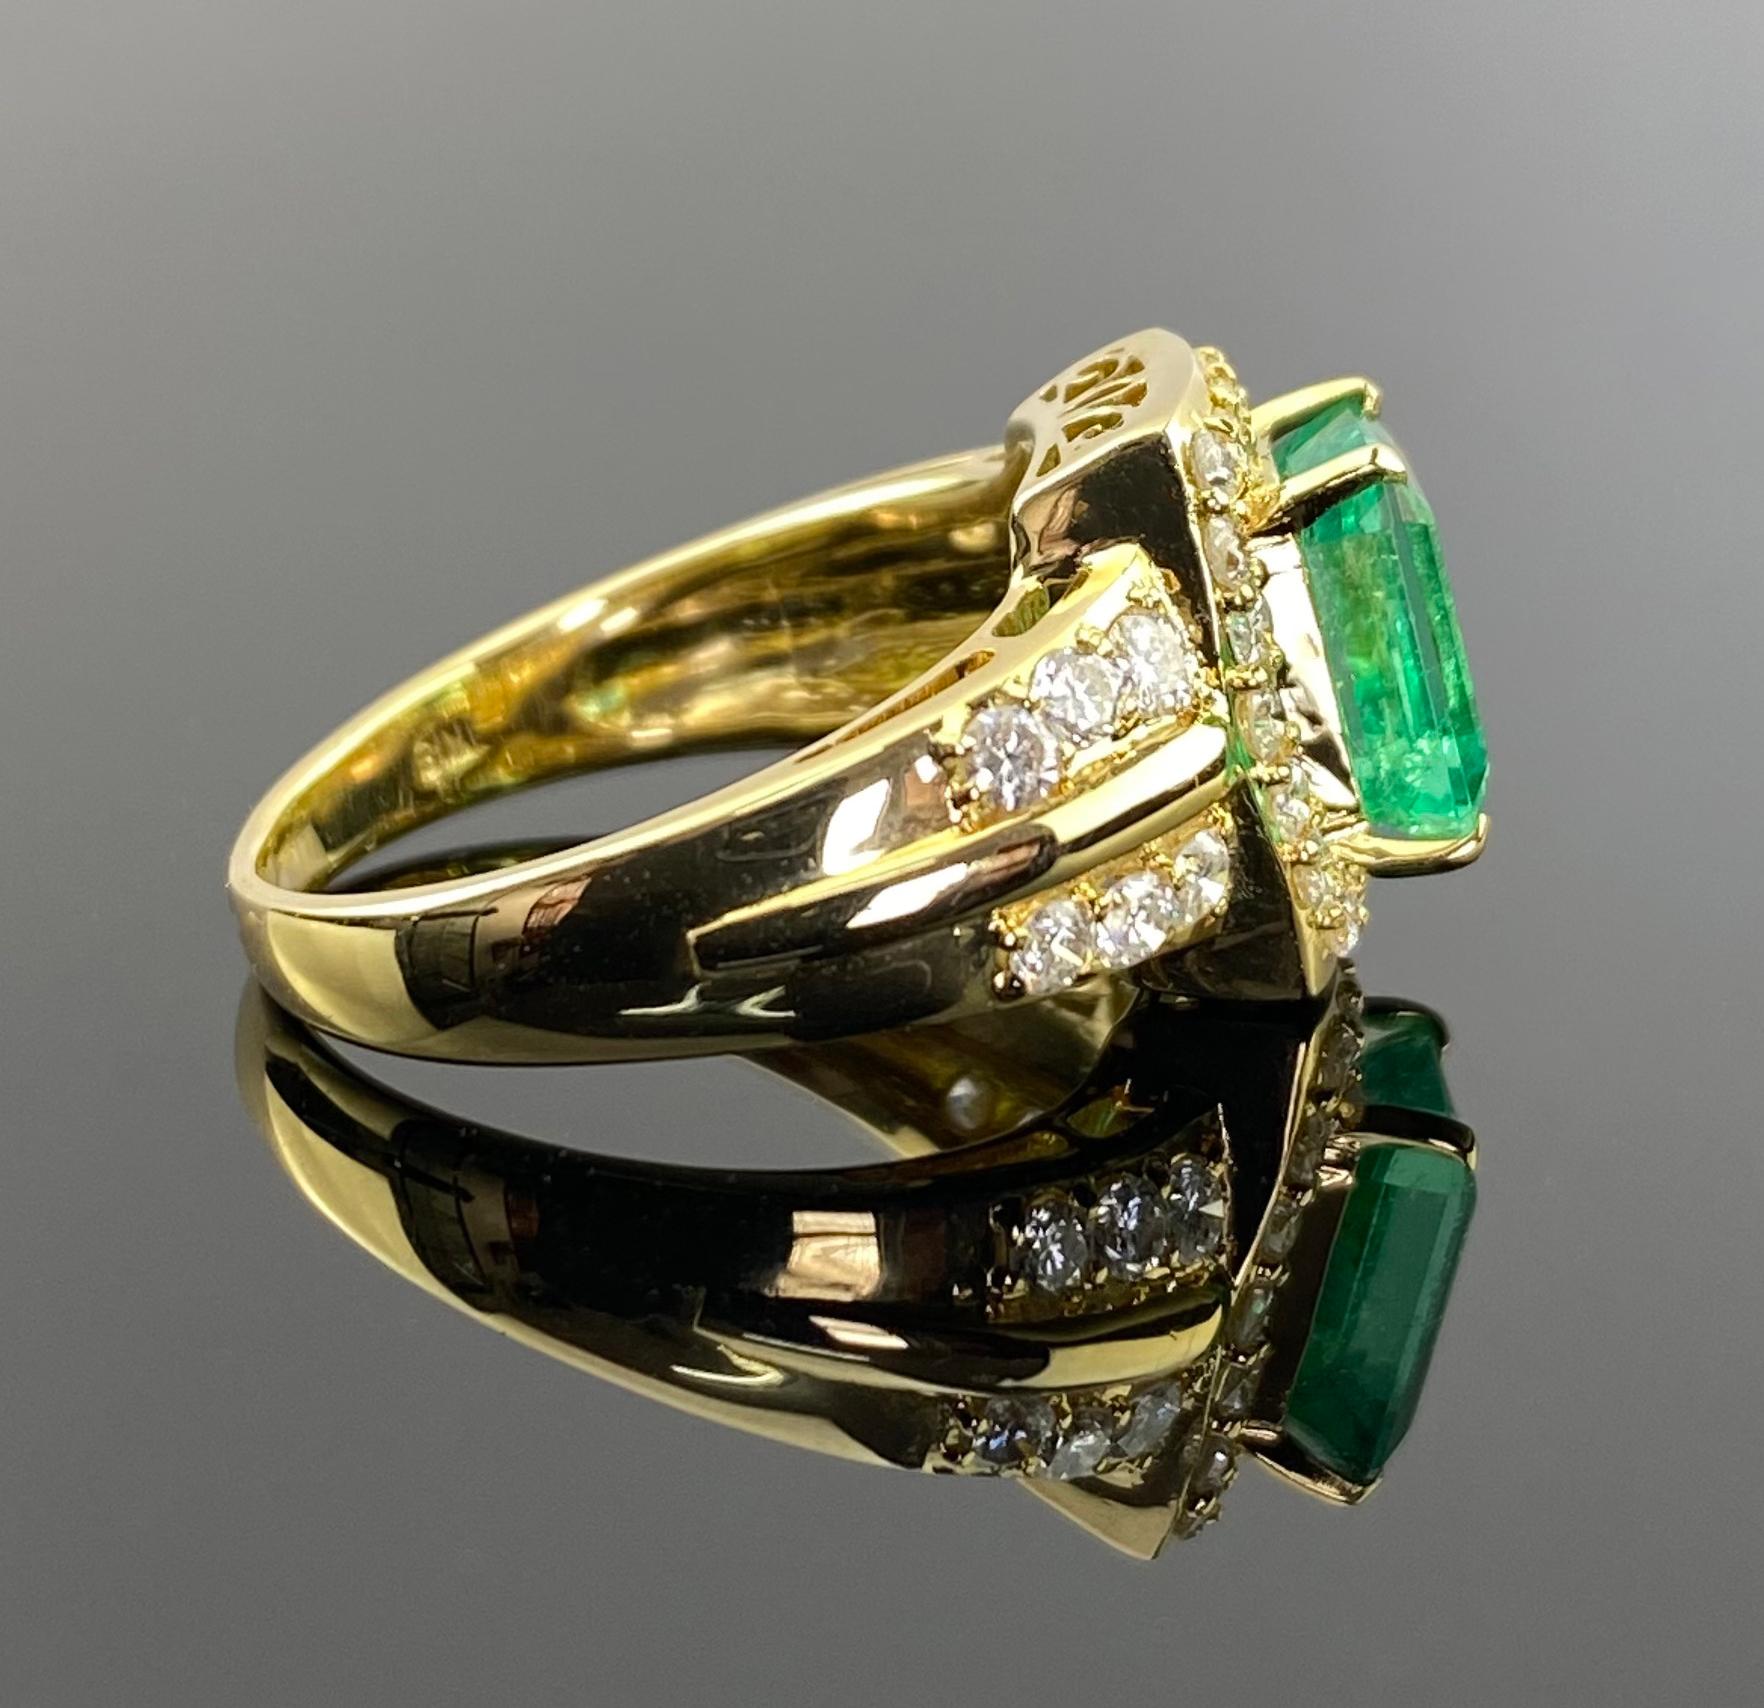 Emerald Cut Certified 2.31 Carat Colombian Emerald and Diamond Cocktail Ring in 18K Gold For Sale